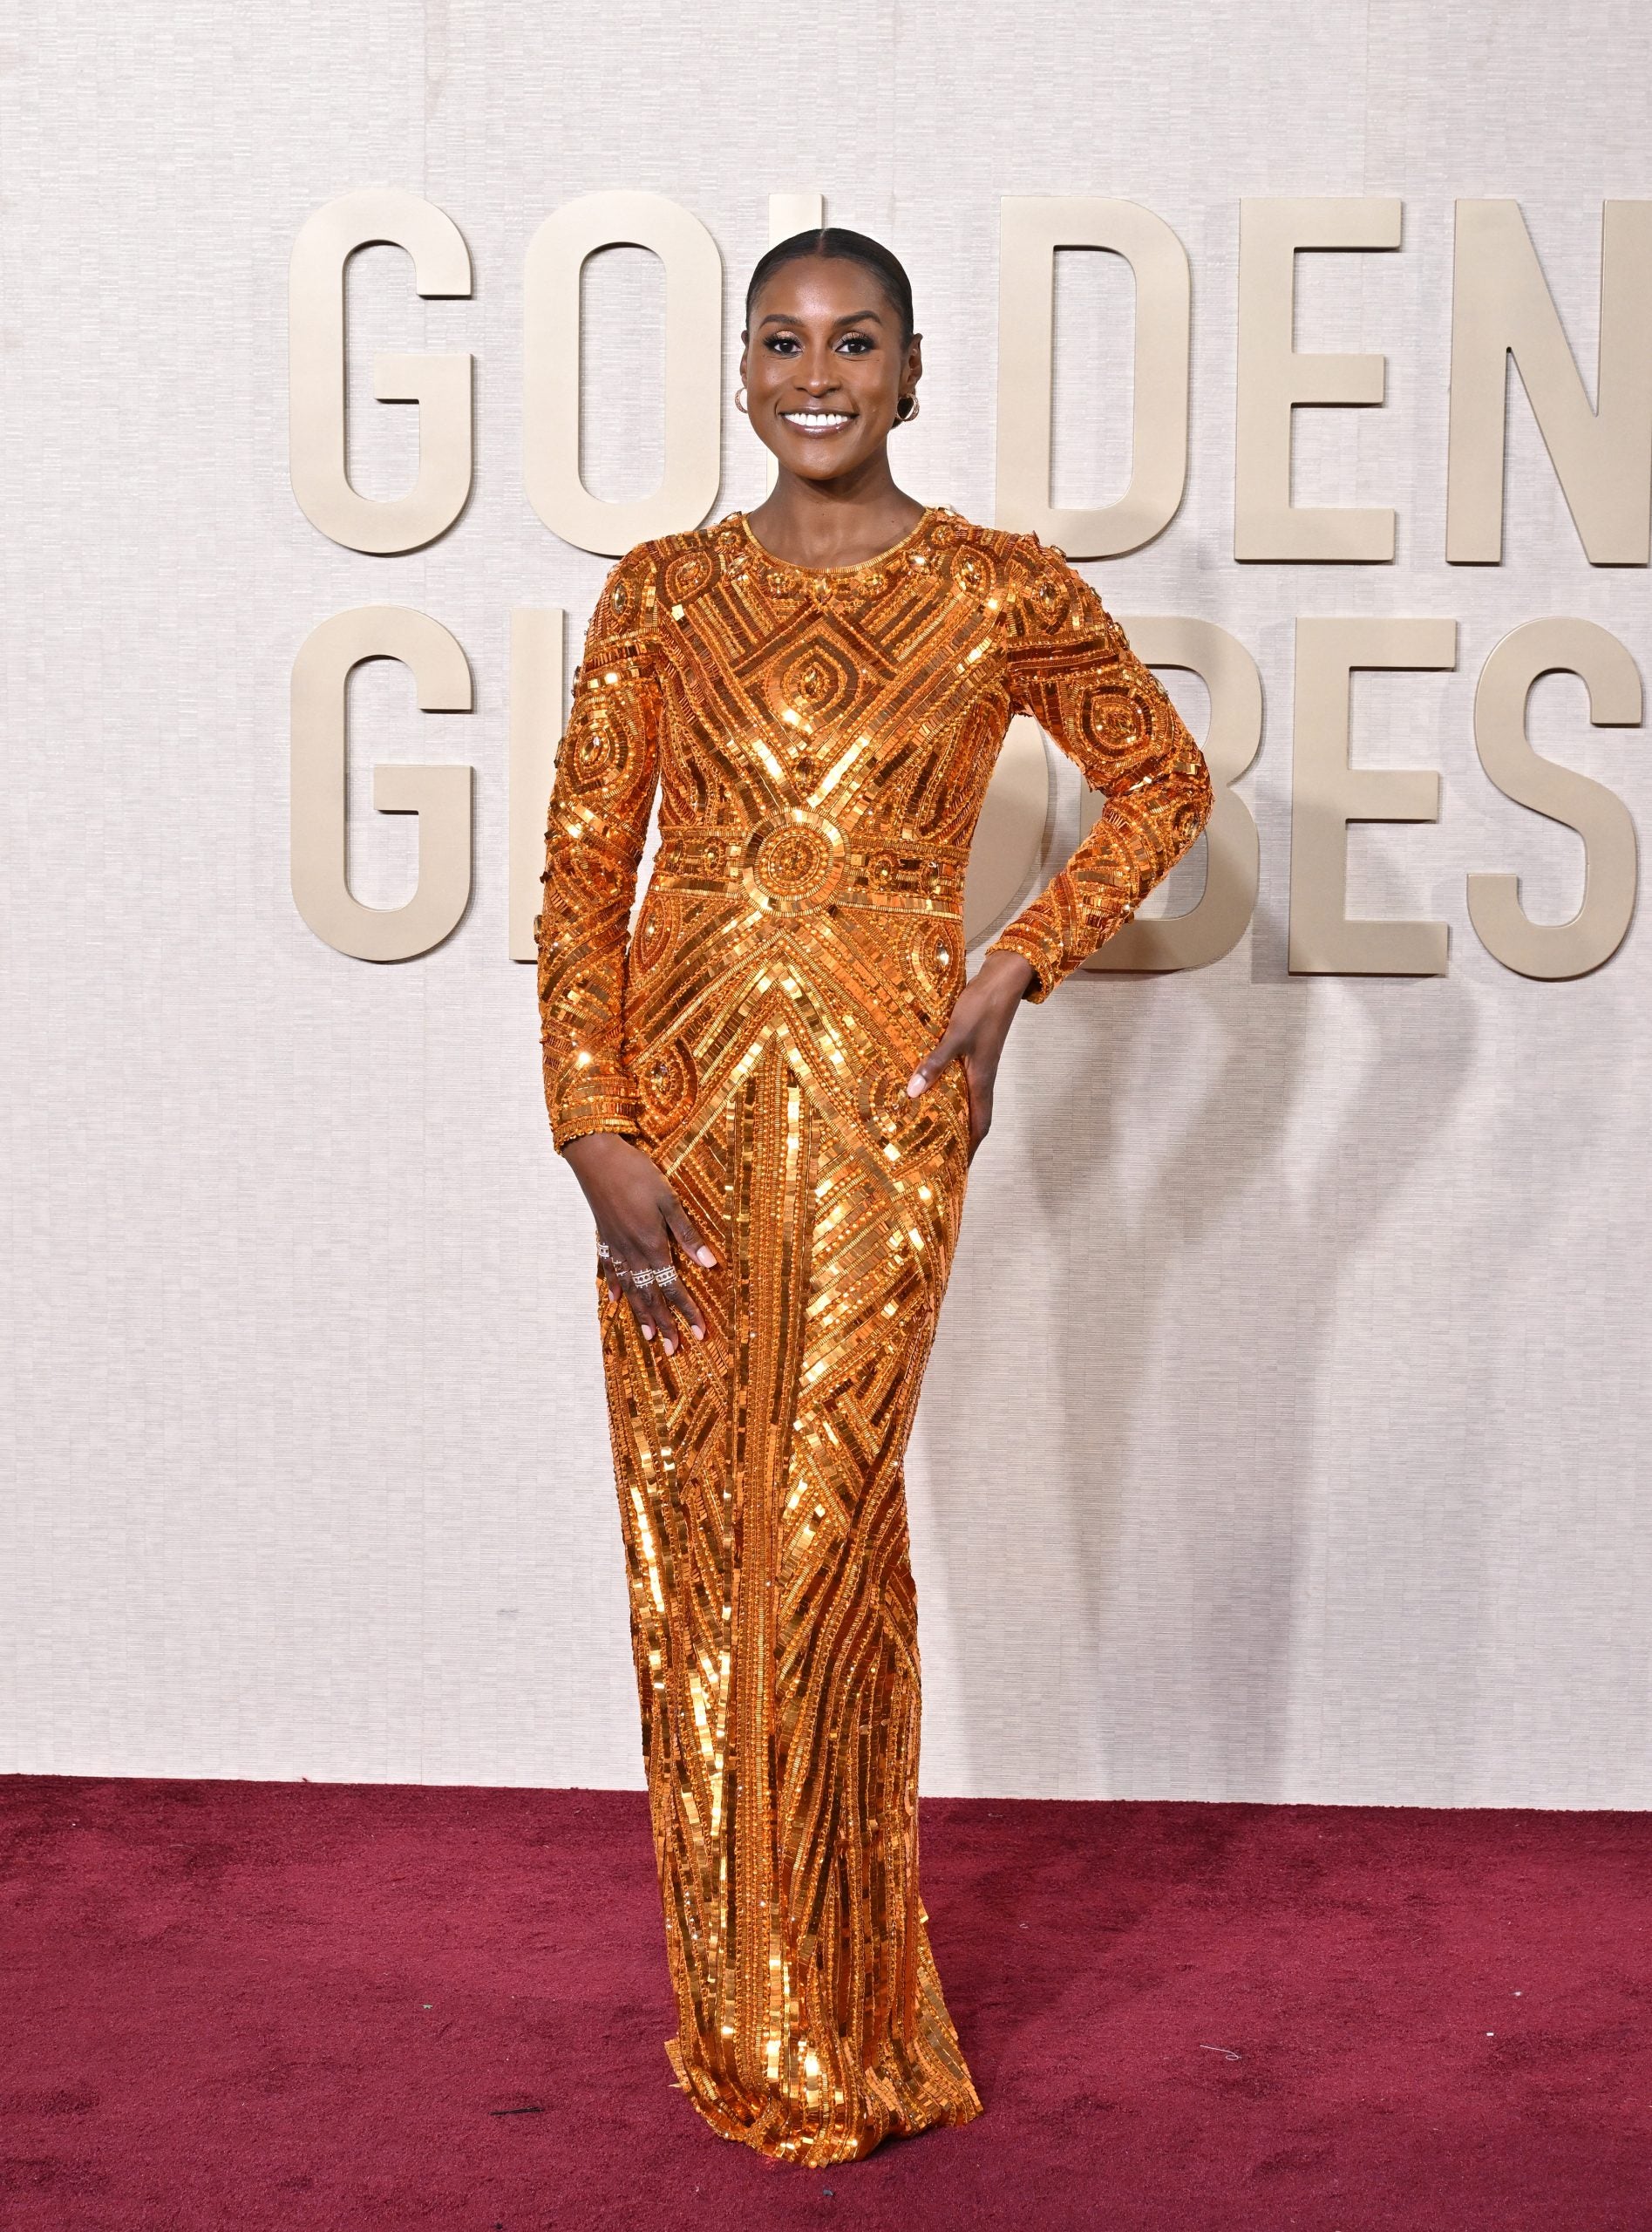 Where Was The Jewelry At The 81st Golden Globe Awards?